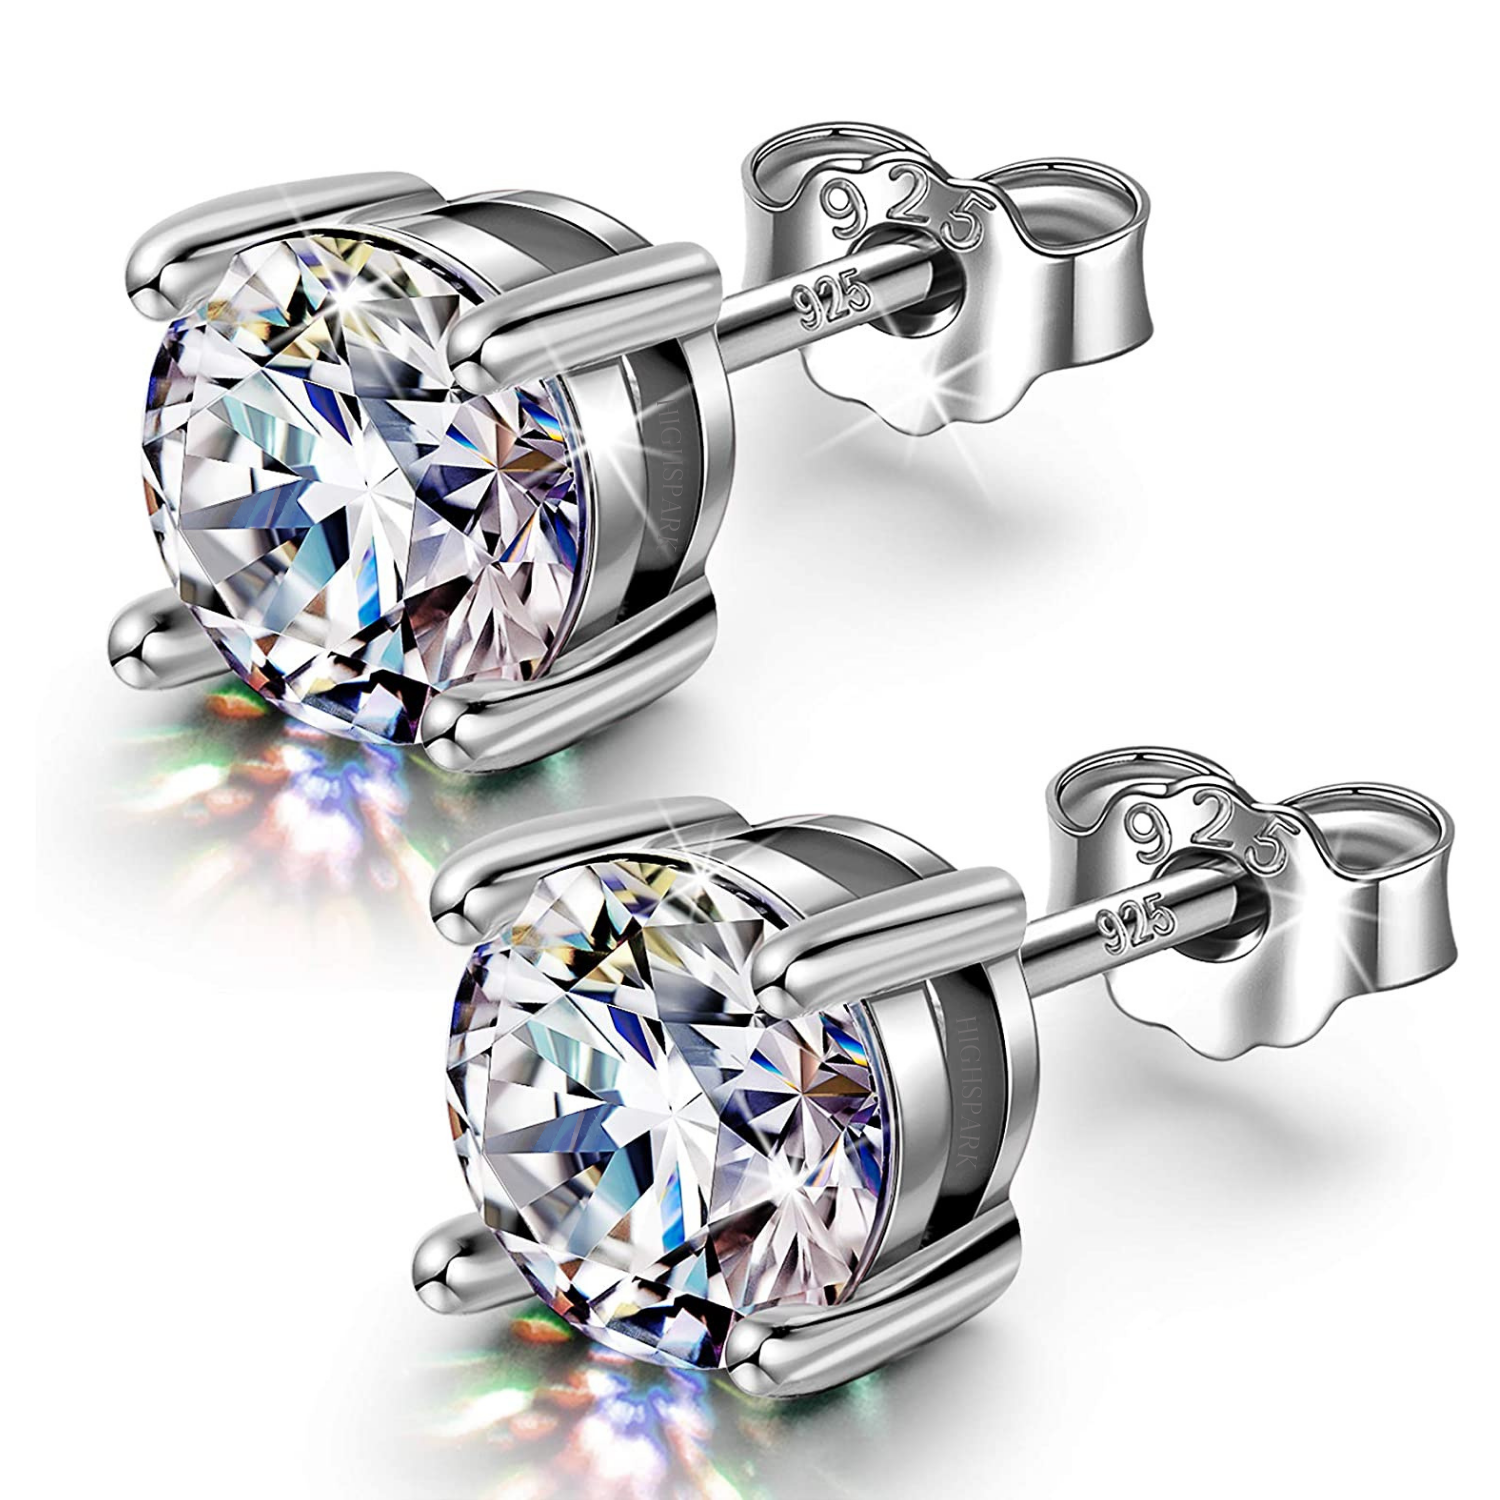 Duty Free Crystal - Classic beauty - Swarovski Treasure Pearl Pierced  Earrings http://ow.ly/rqHY50DTR1I #Swarovski #VatFree #FreeUKdelivery  #CrystalEarrings #SwarovskiGuernsey | Facebook